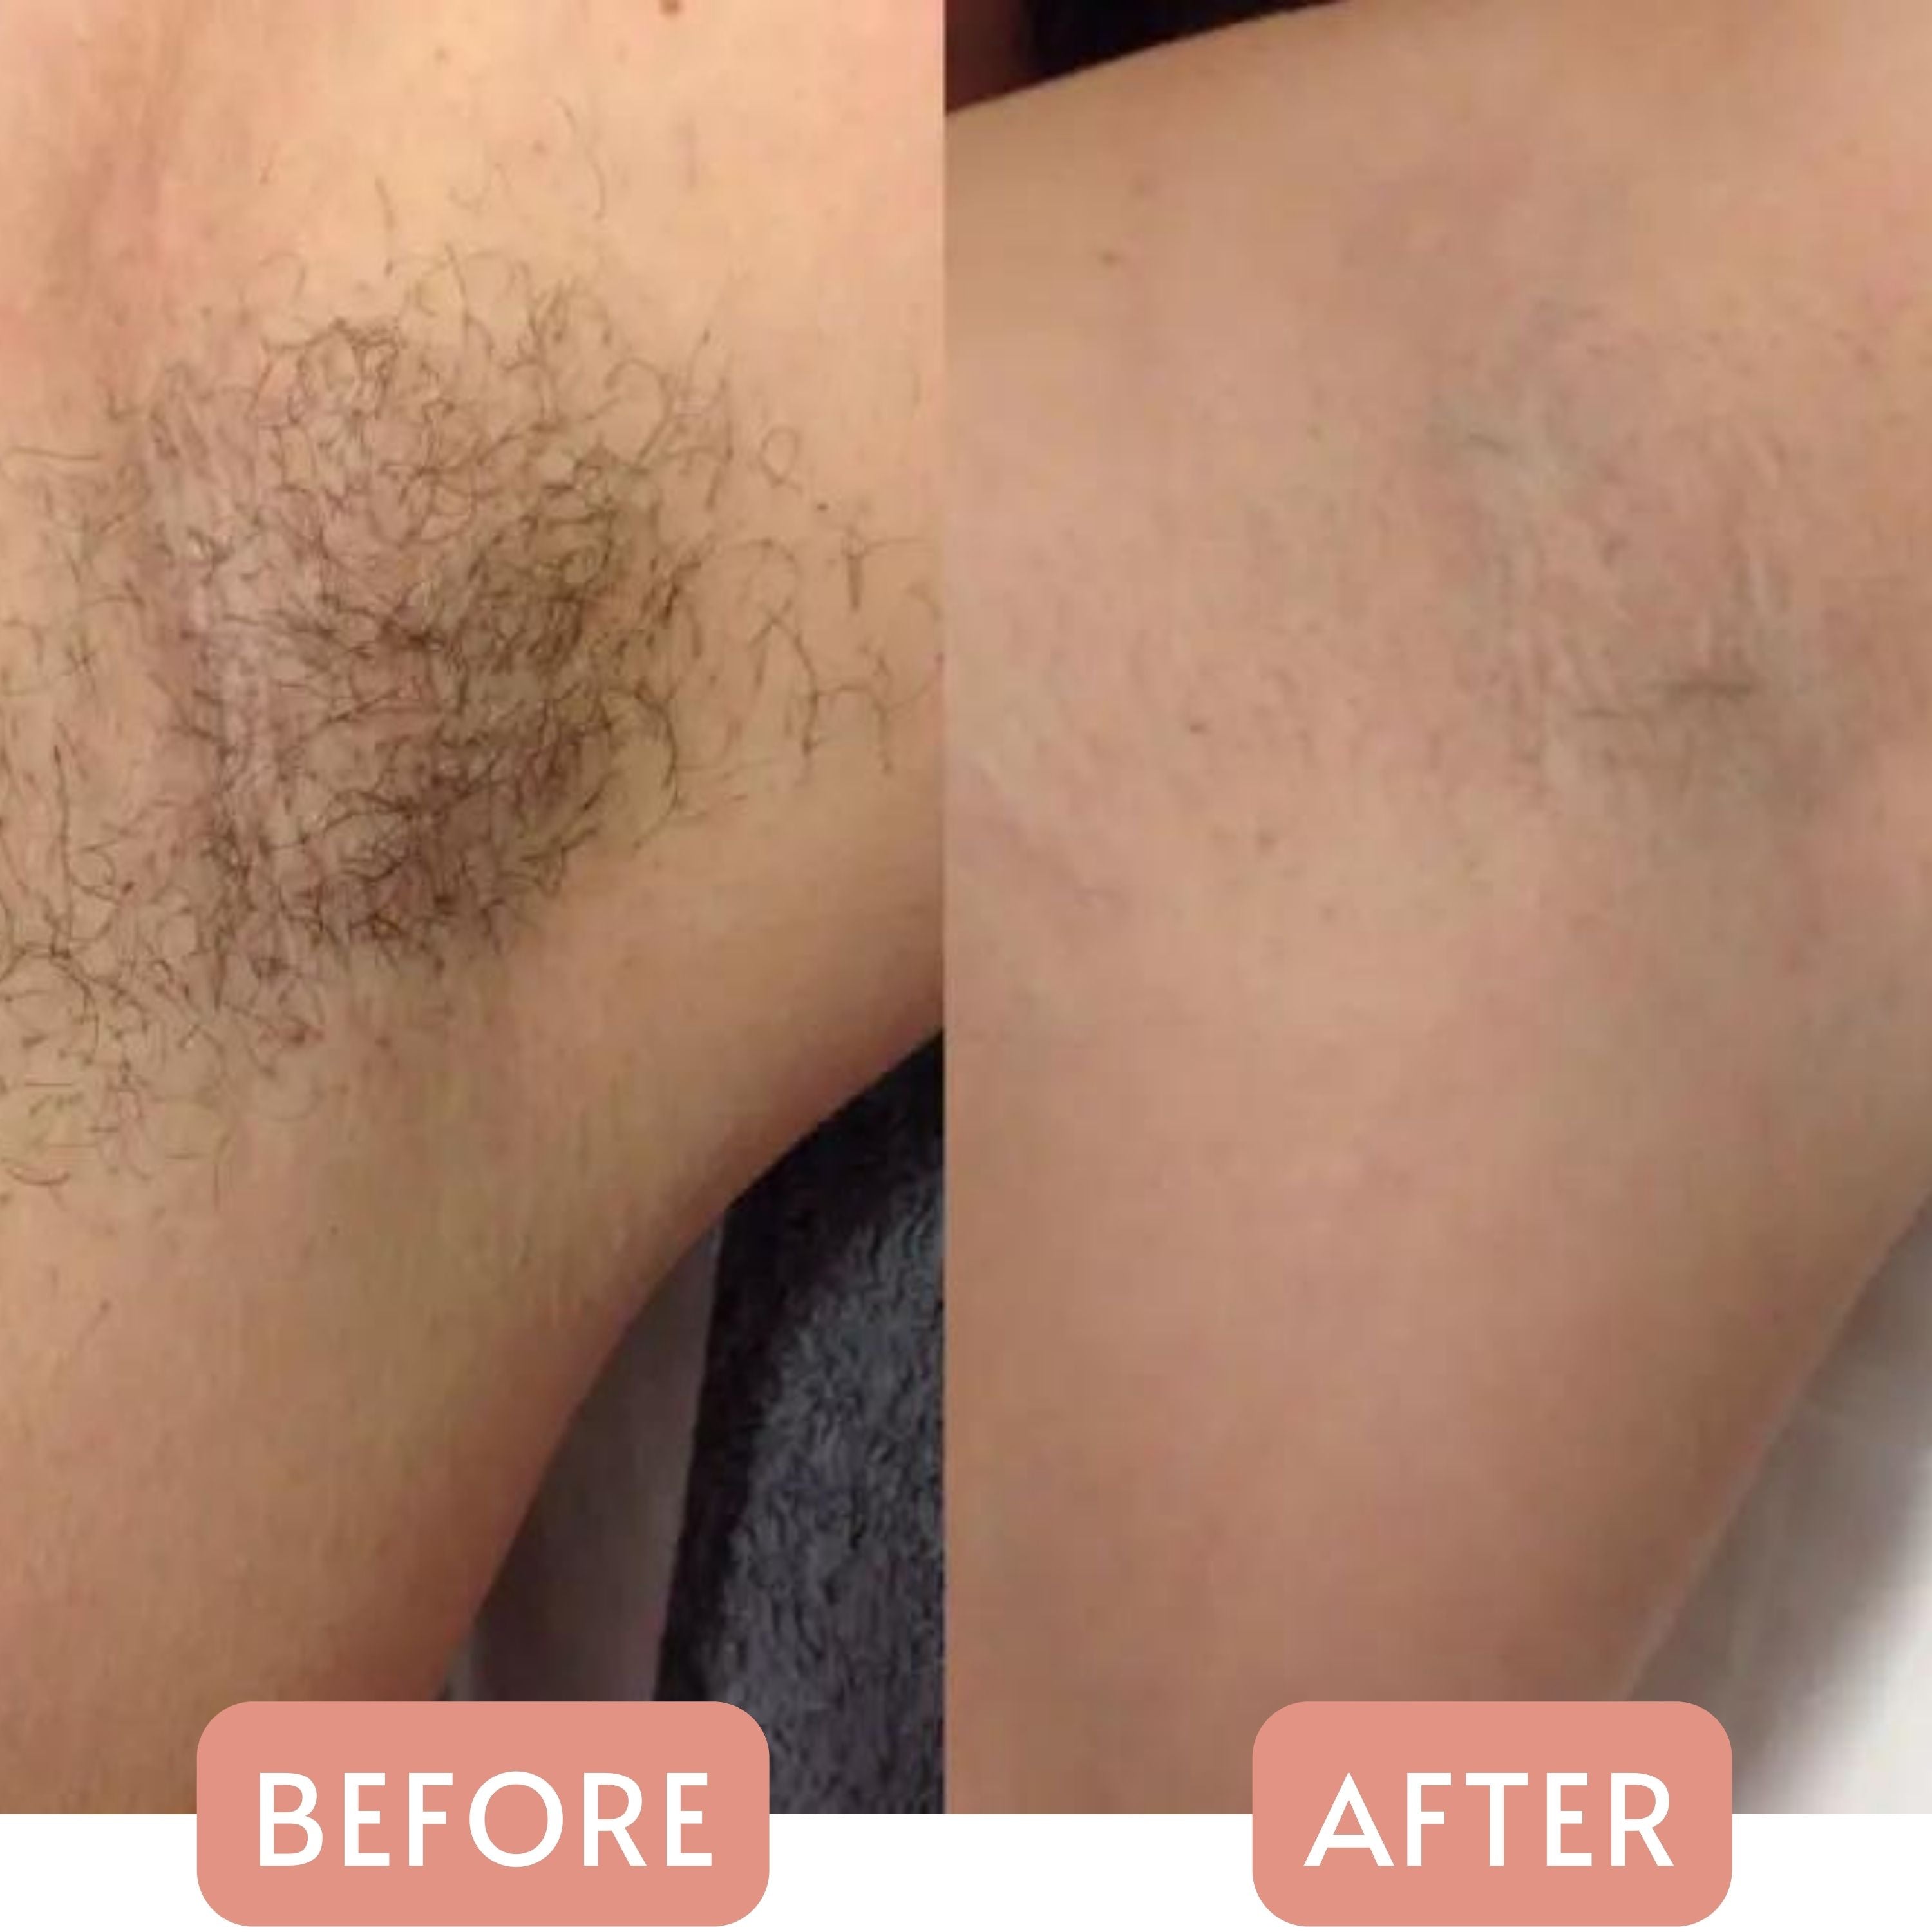 My Sheen Skin Before and After Results using IPL Laser Hair Removal At Home Device